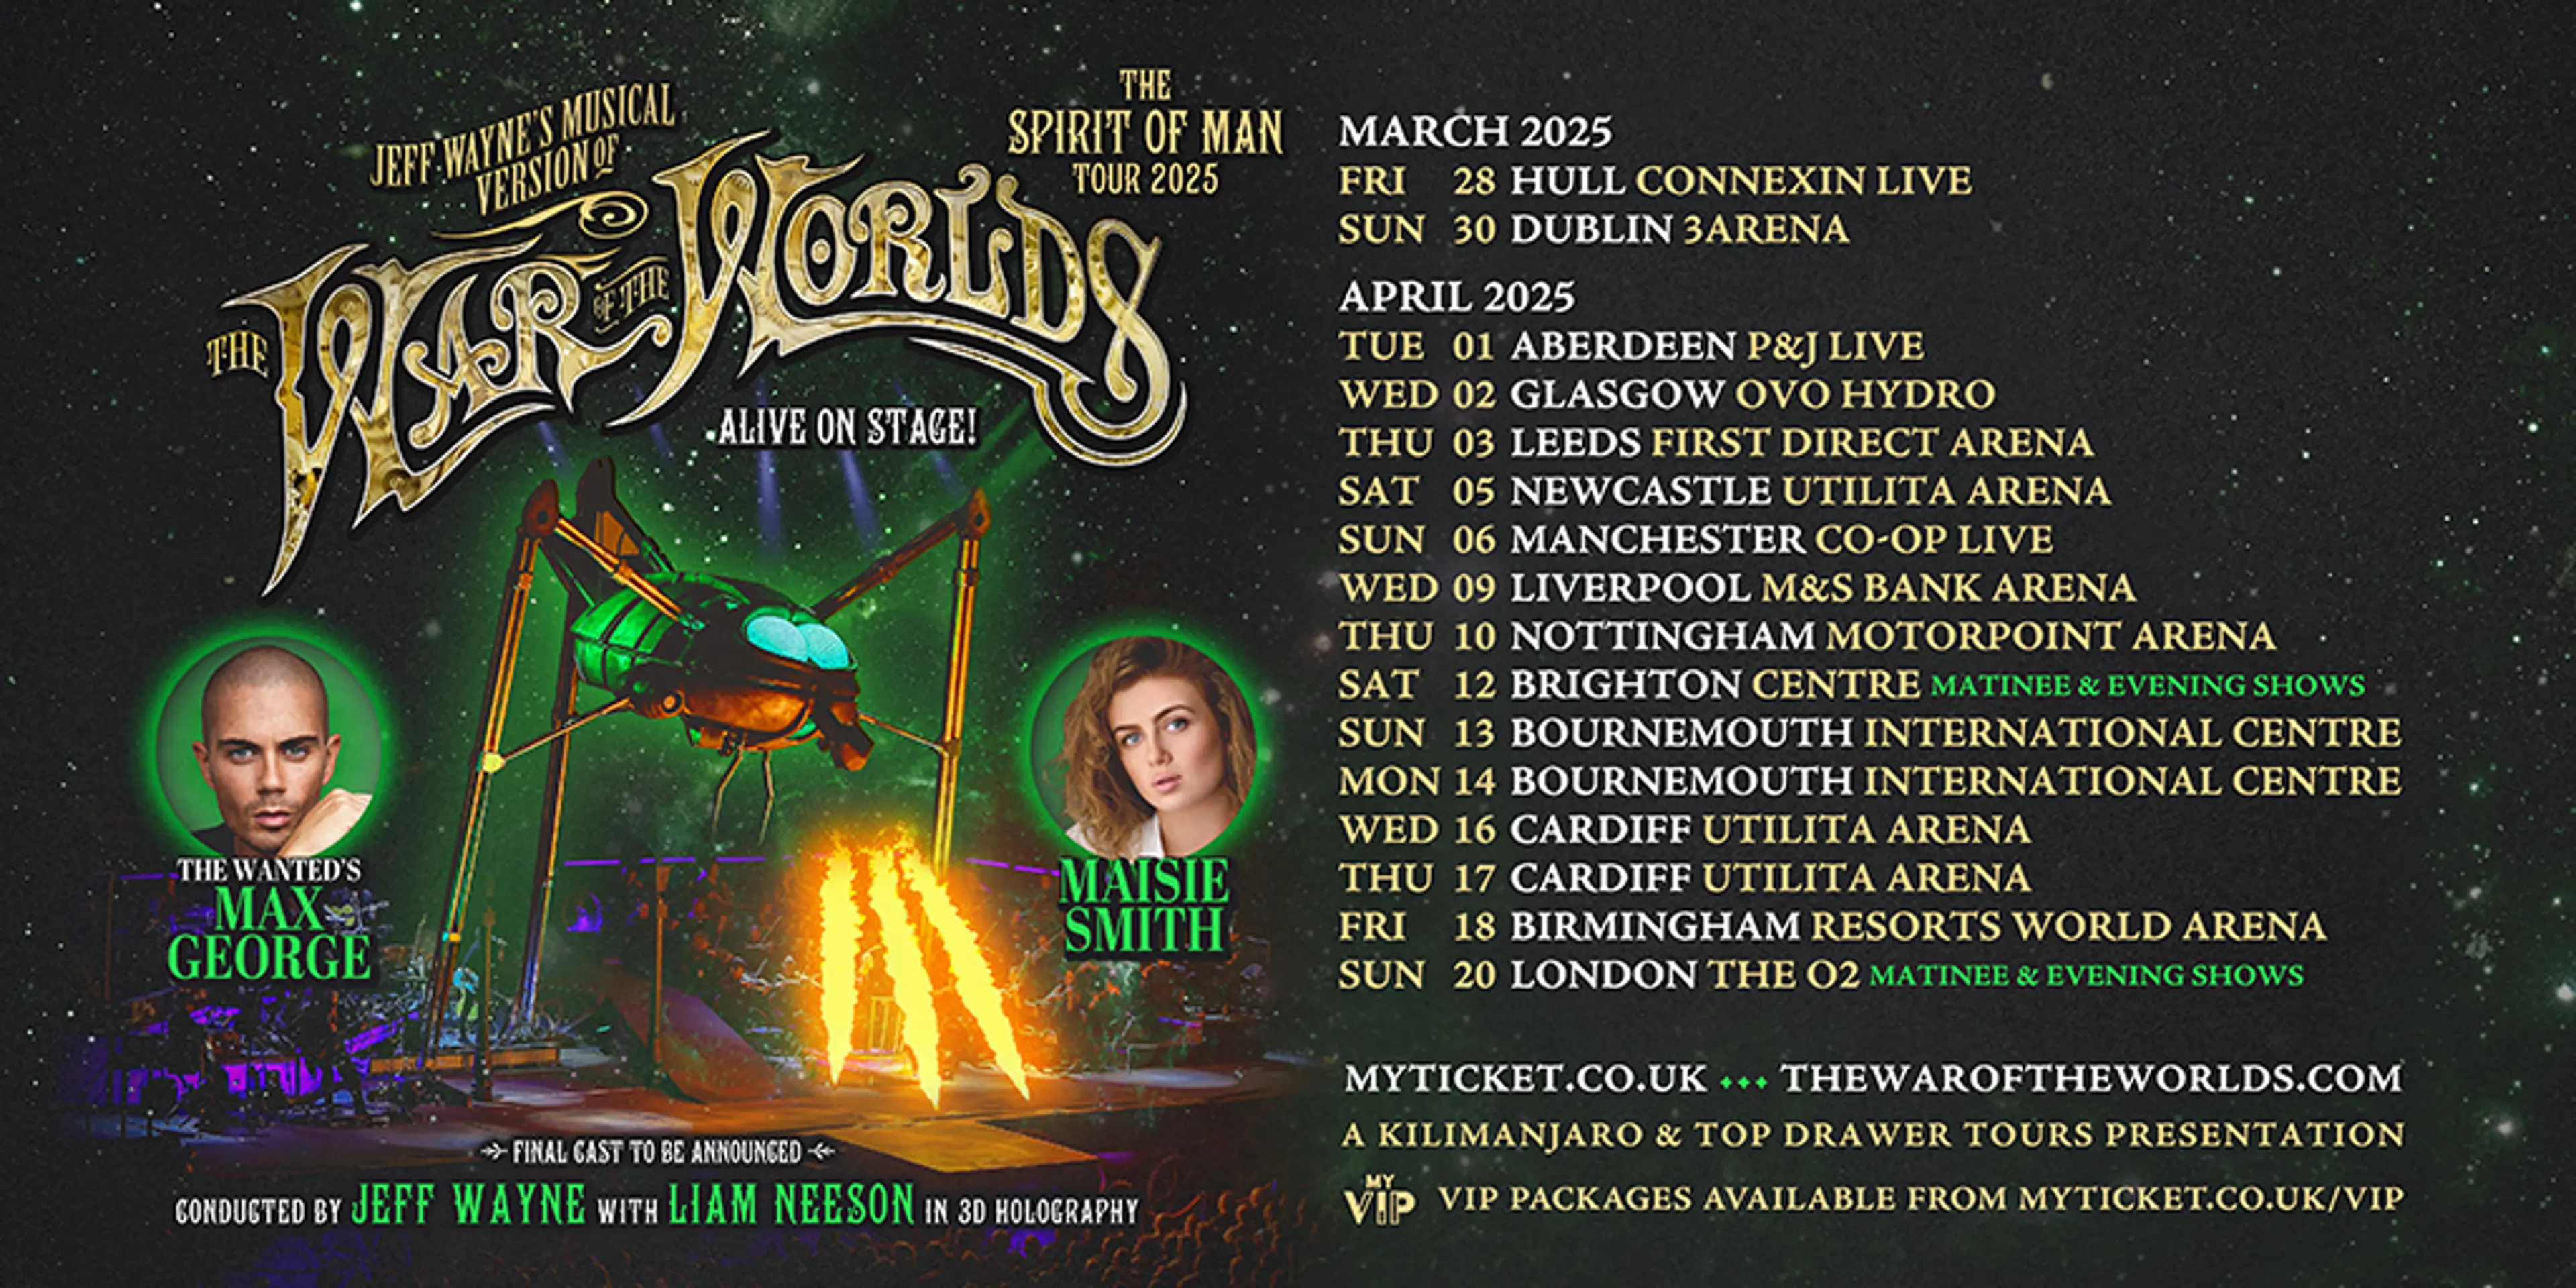 Jeff Wayne’s The War of the Worlds – Alive on Stage! The Spirit of Man Tour